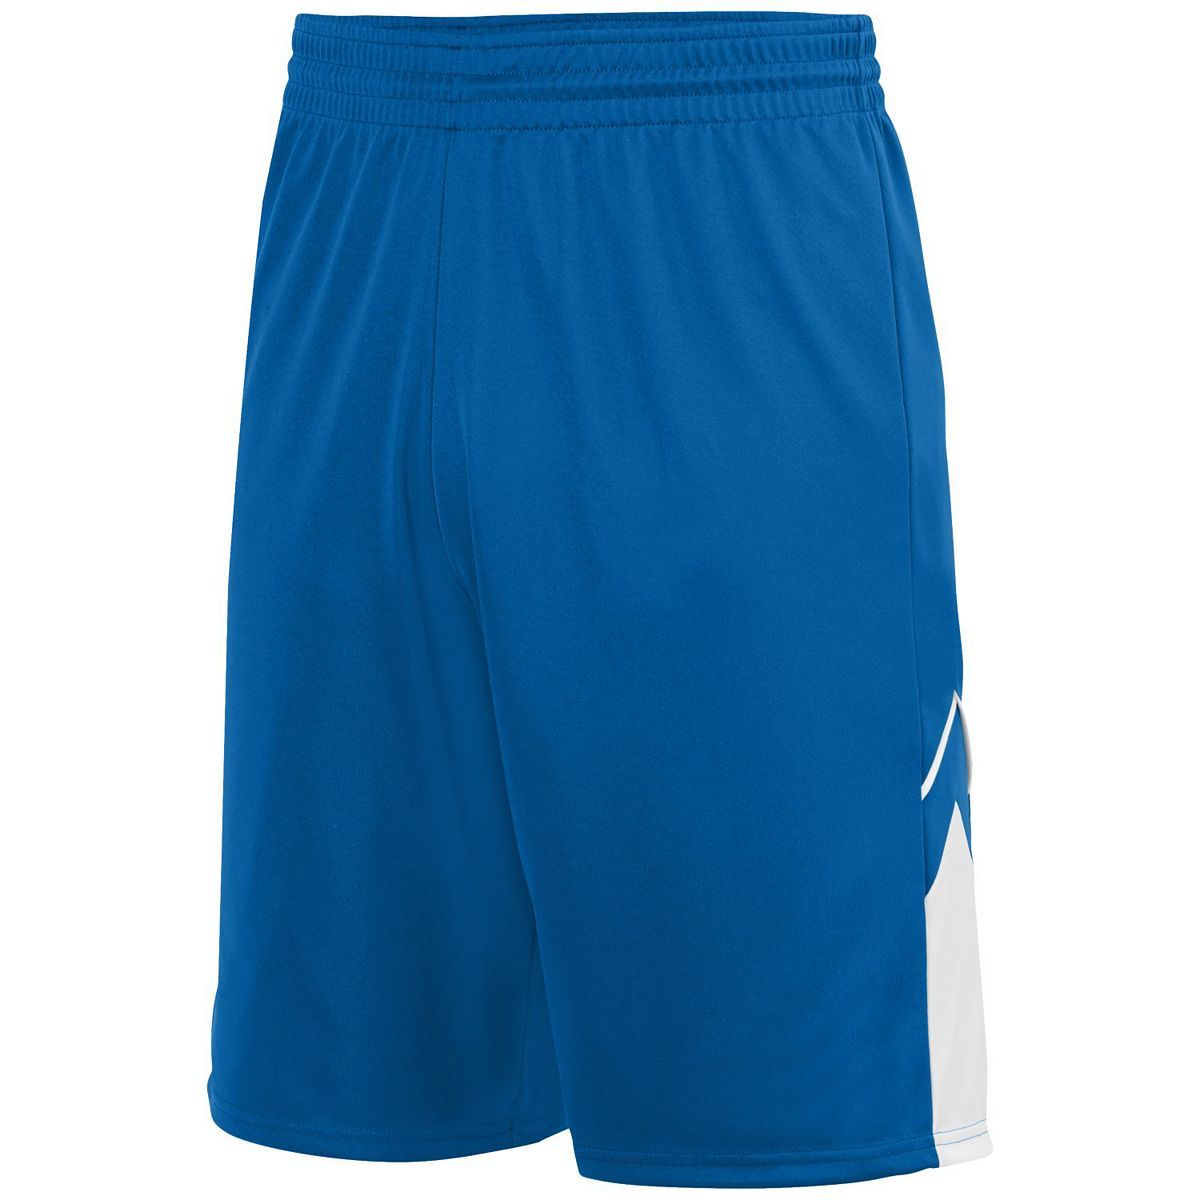 Augusta Sportswear Alley-Oop Reversible Shorts in Royal/White  -Part of the Adult, Adult-Shorts, Augusta-Products, Basketball, All-Sports, All-Sports-1 product lines at KanaleyCreations.com